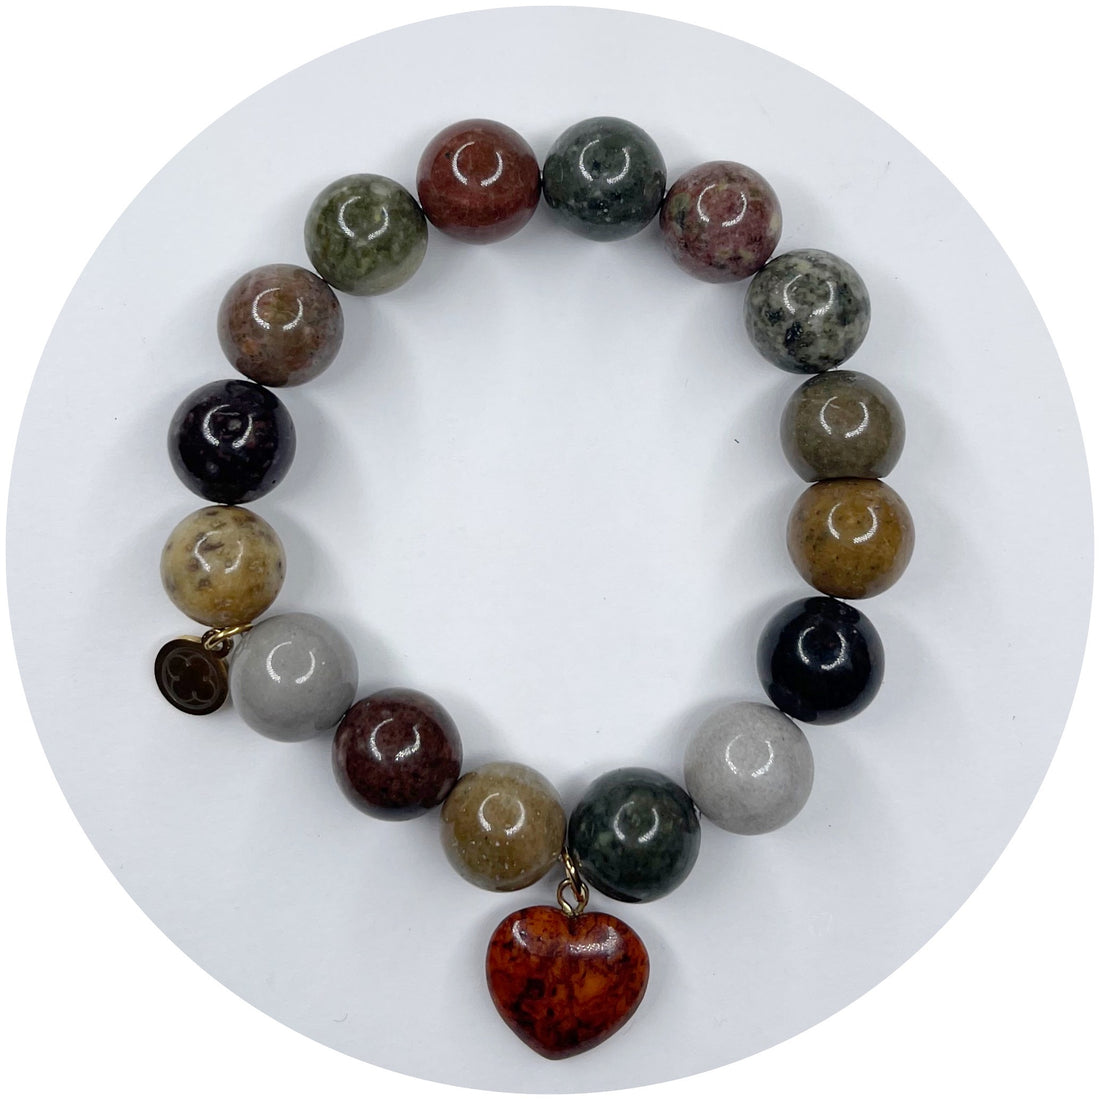 Harvest Riverstone with Riverstone Heart Pendant